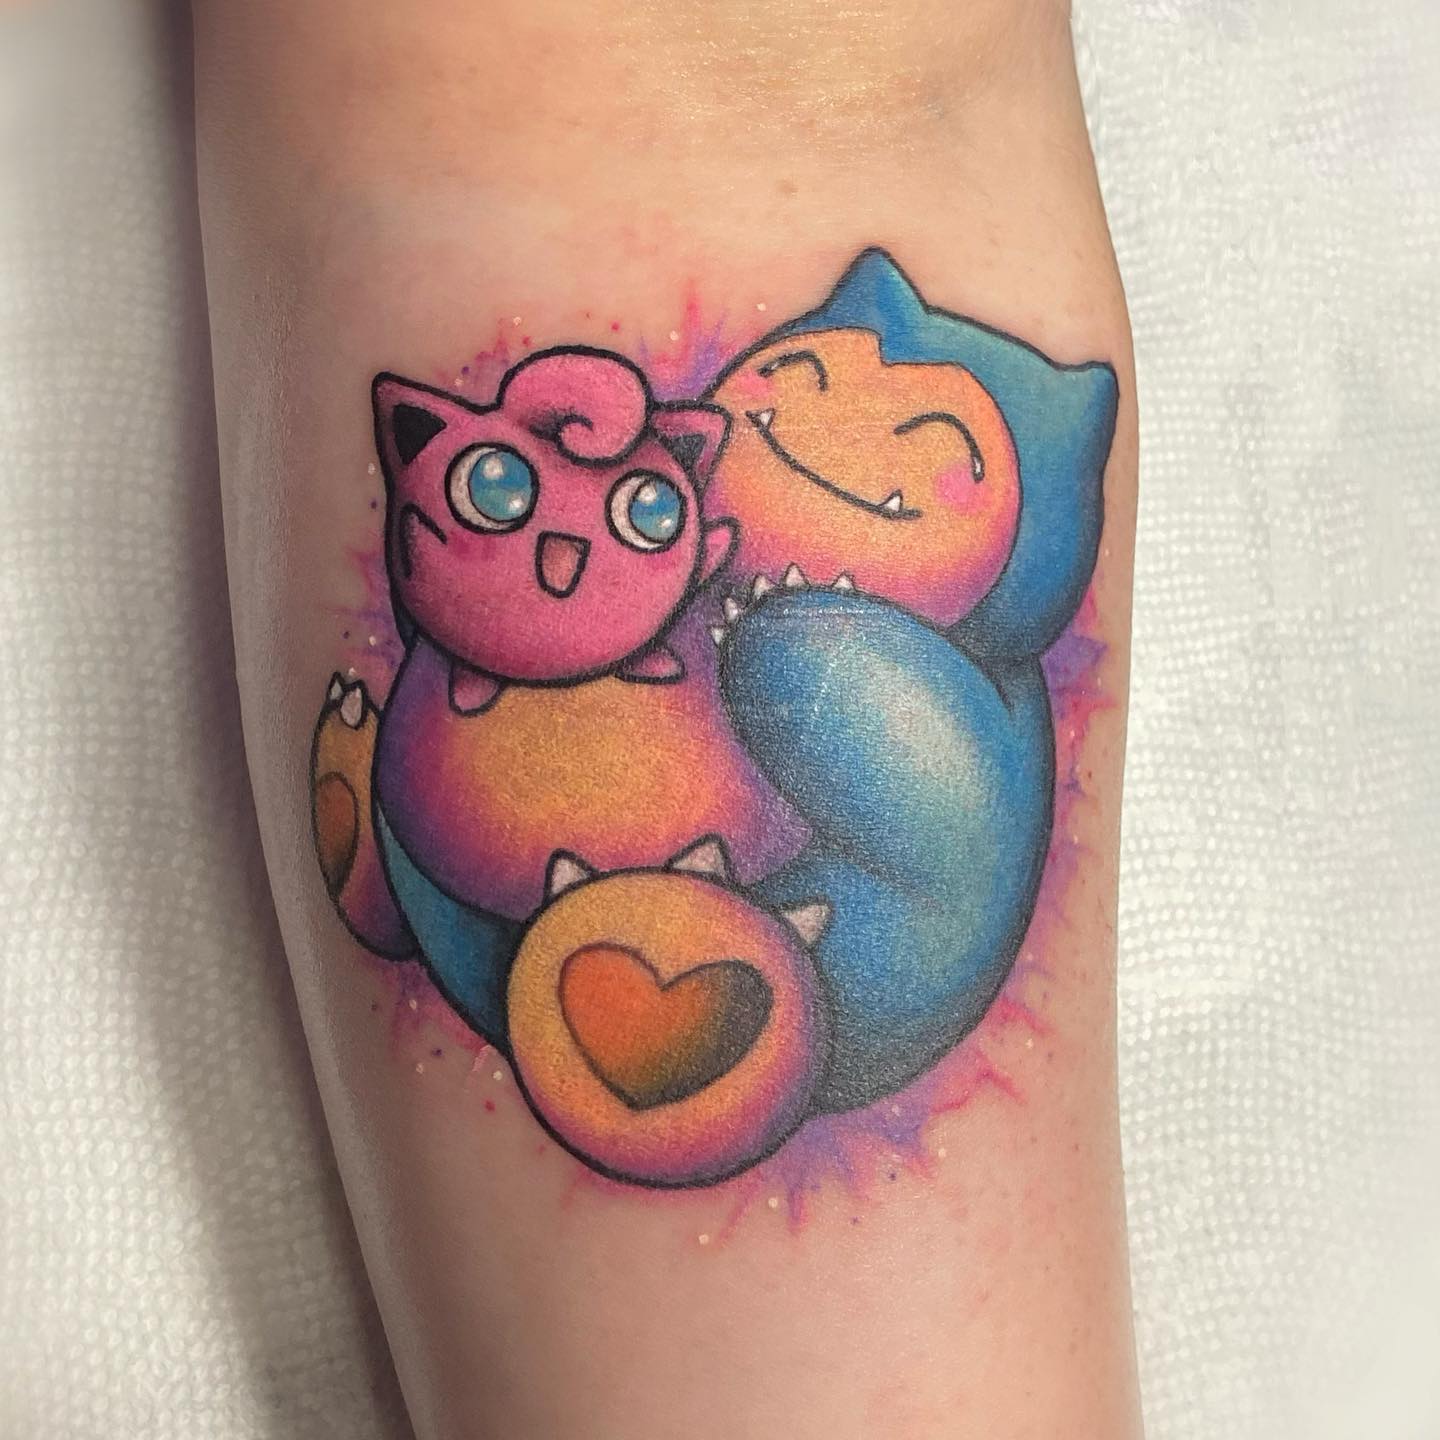 One Pokemon character is enough to make you get happy but what about two? Combining two Pokémon characters in just one title design is a great idea. And the best part about this tattoo is that the characters are hugging each other.